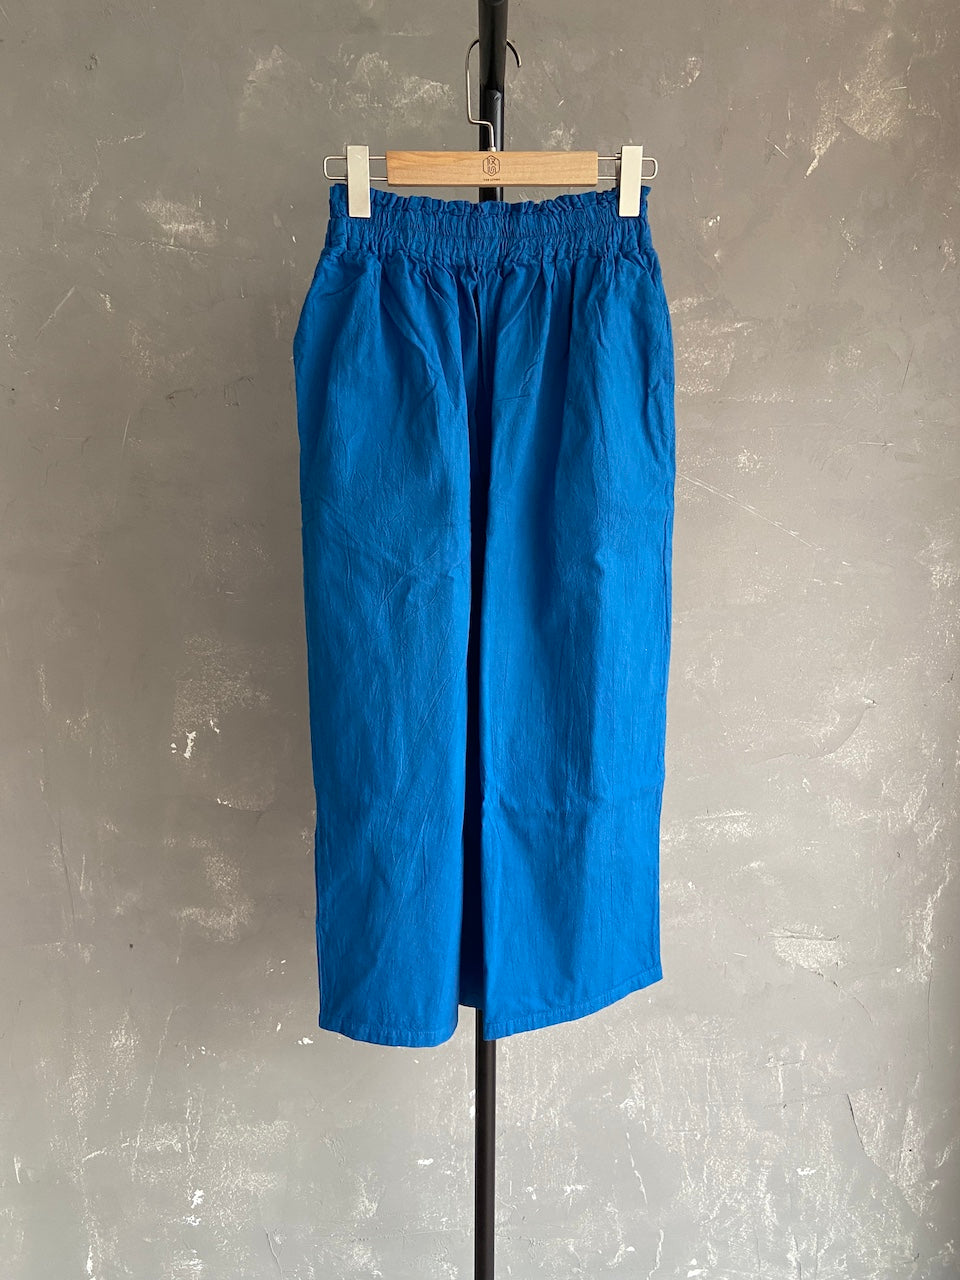 Hand Dyed Farmer's Pants in Blue